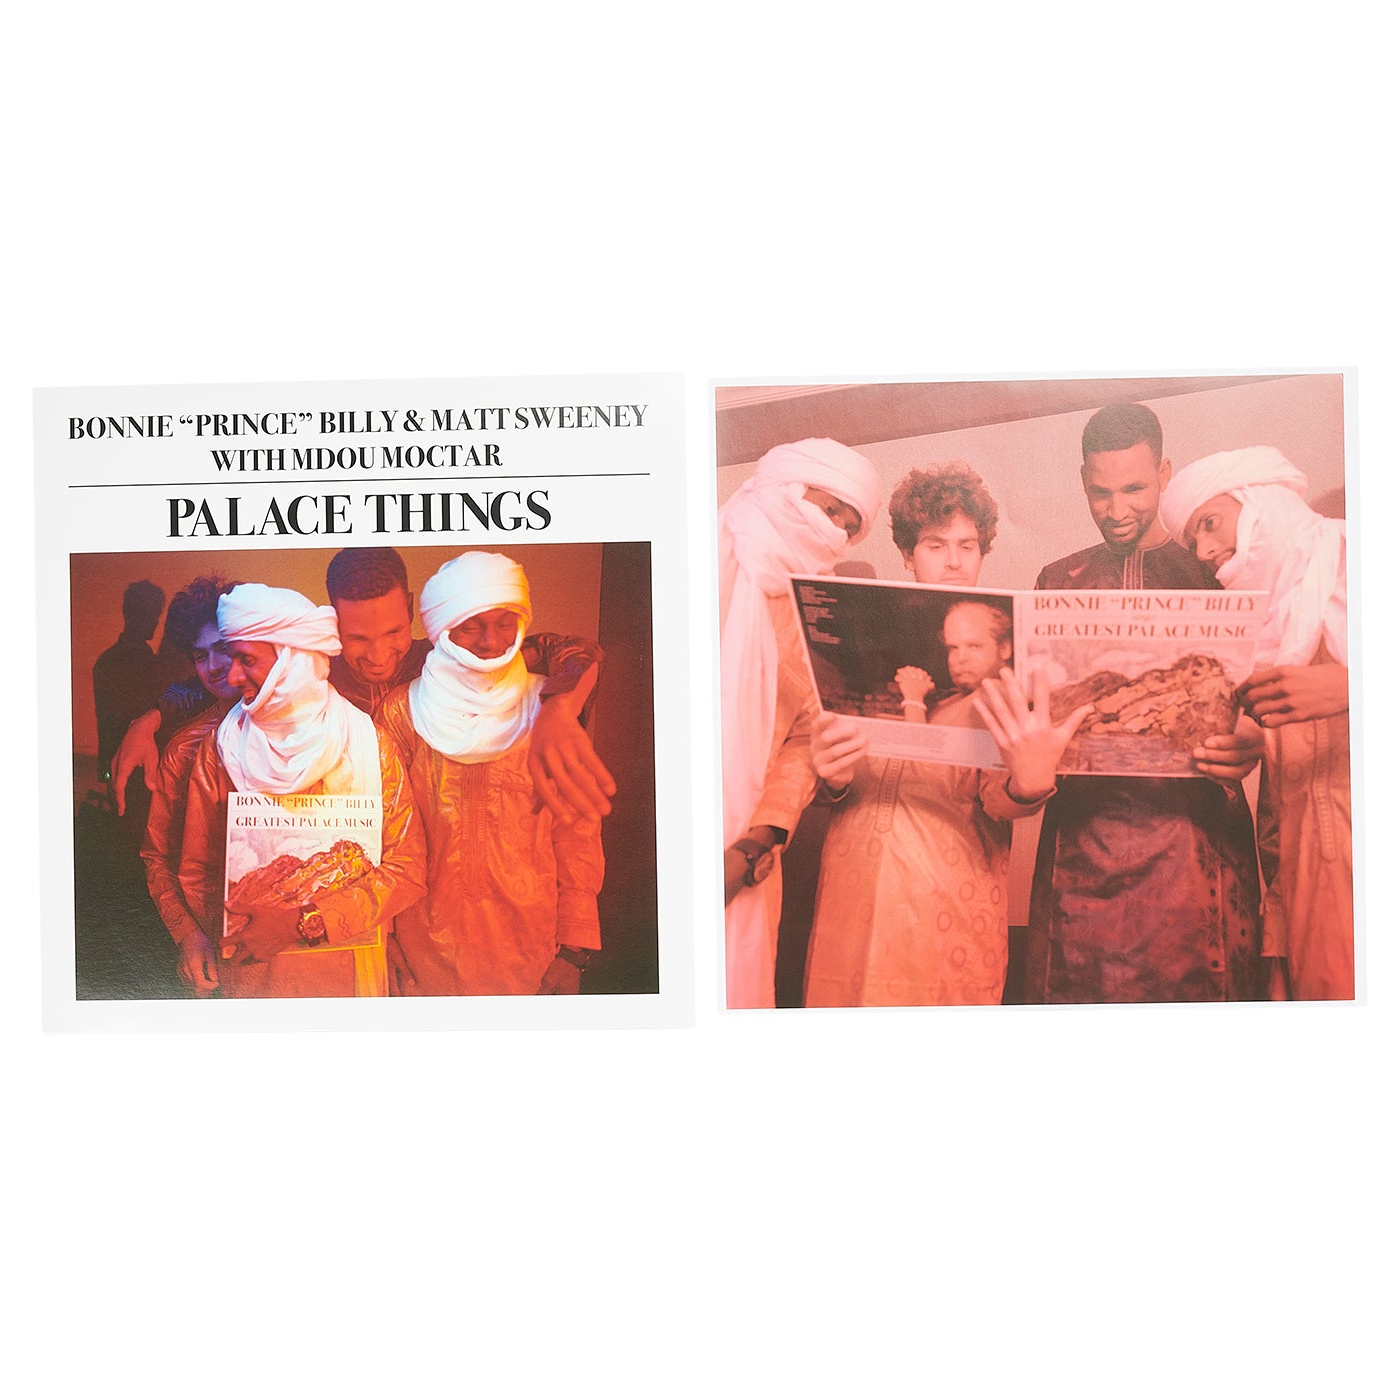 Thumbnail BONNIE ‘PRINCE’ BILLY & MATT SWEENEY WITH MDOU MOCTAR - PALACE THINGS MULTI one color